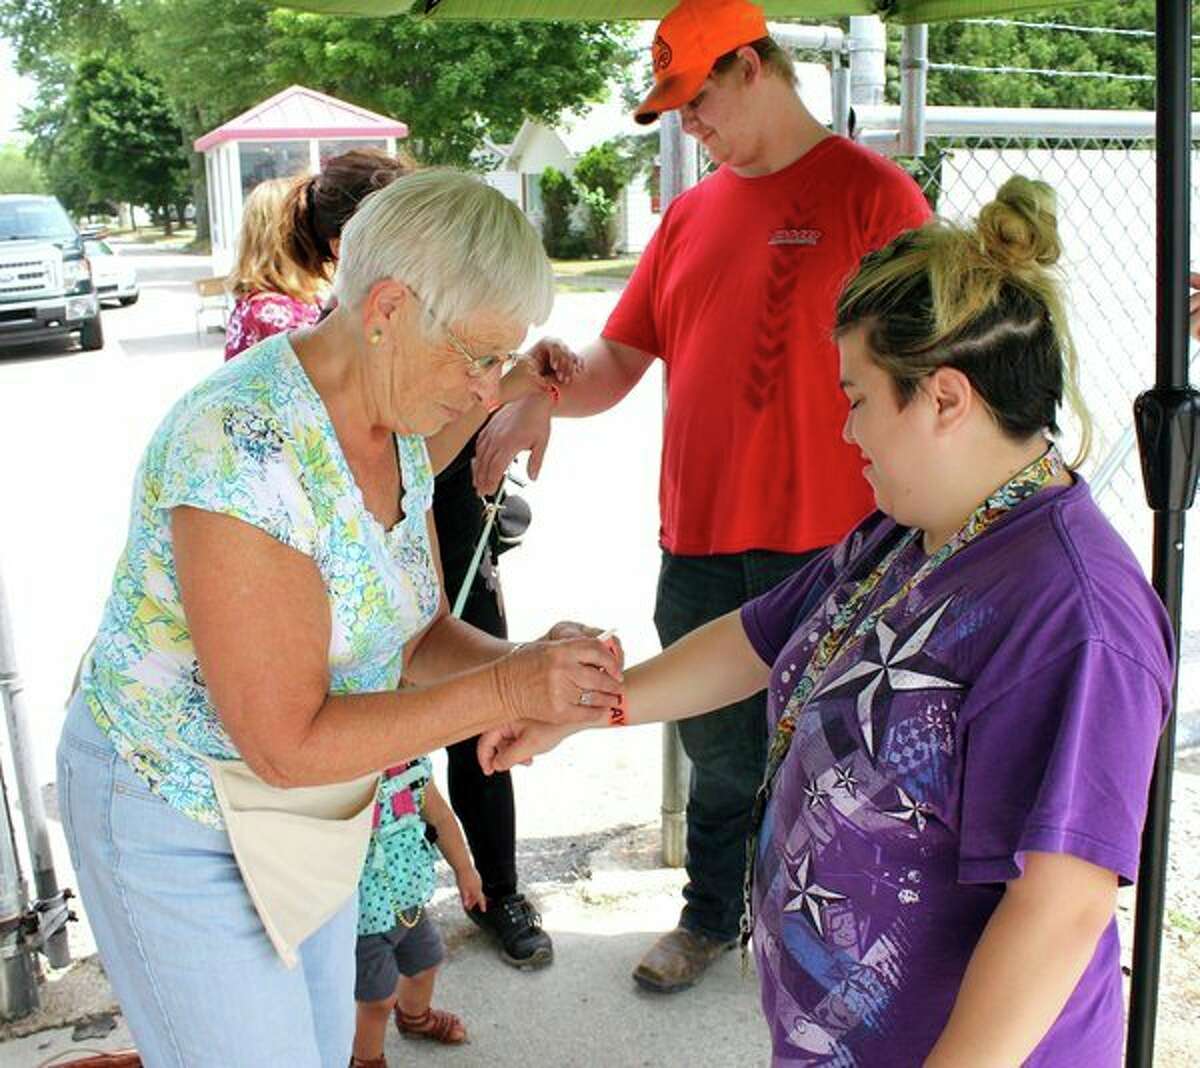 Joann Cove, left, helps Nicole Duda with her admission bracelet to the Huron Community Fair. Cove has worked the gate for 25 years. Also pictured is Cody Koglin. (Brenda Battel/Huron Daily Tribune)